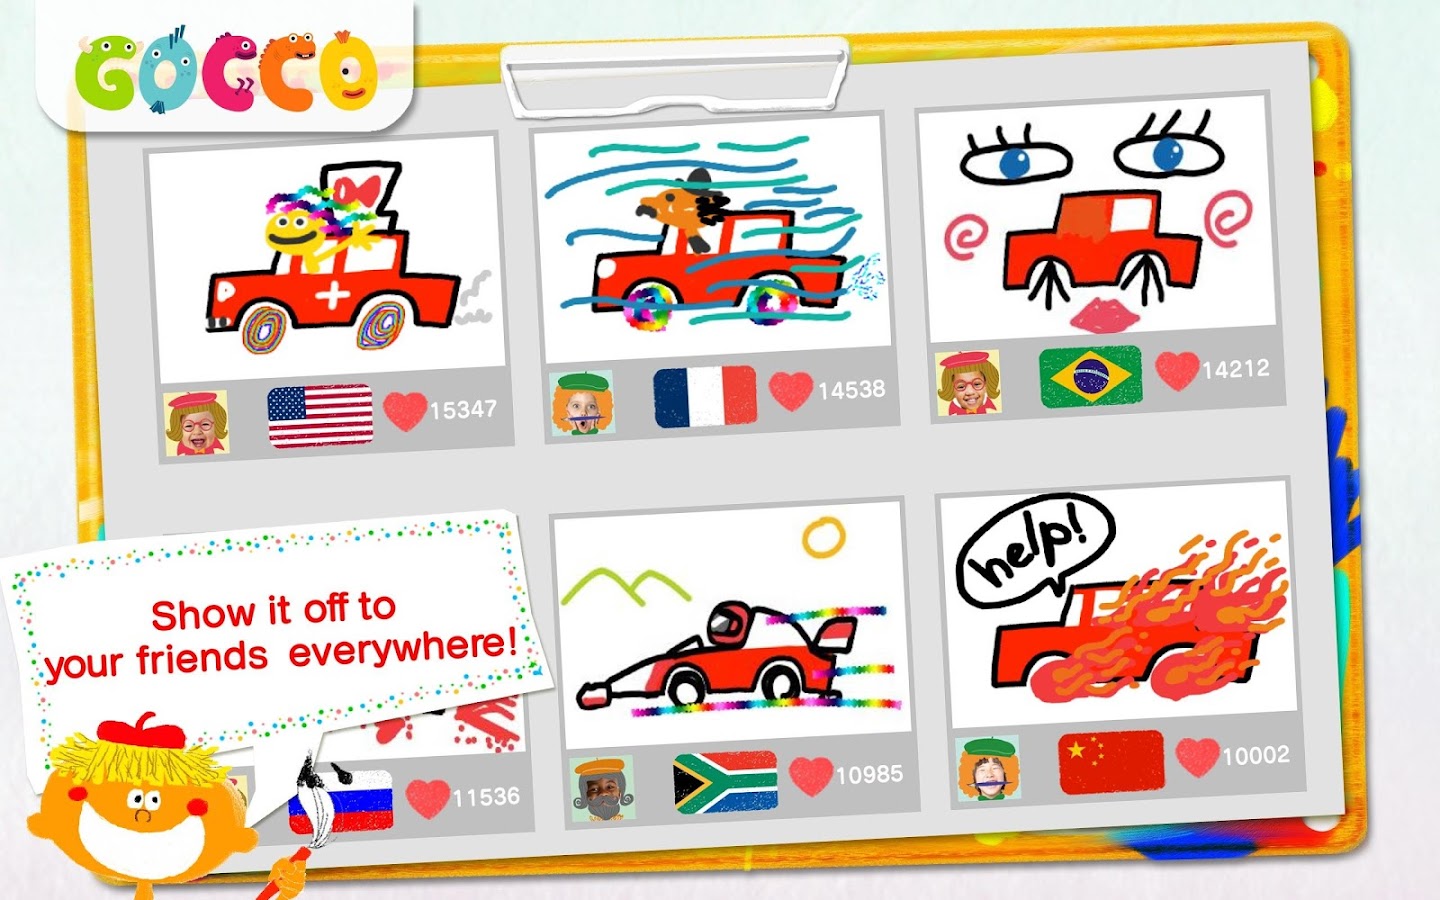 Gocco Doodle PaintShare Apl Android Di Google Play